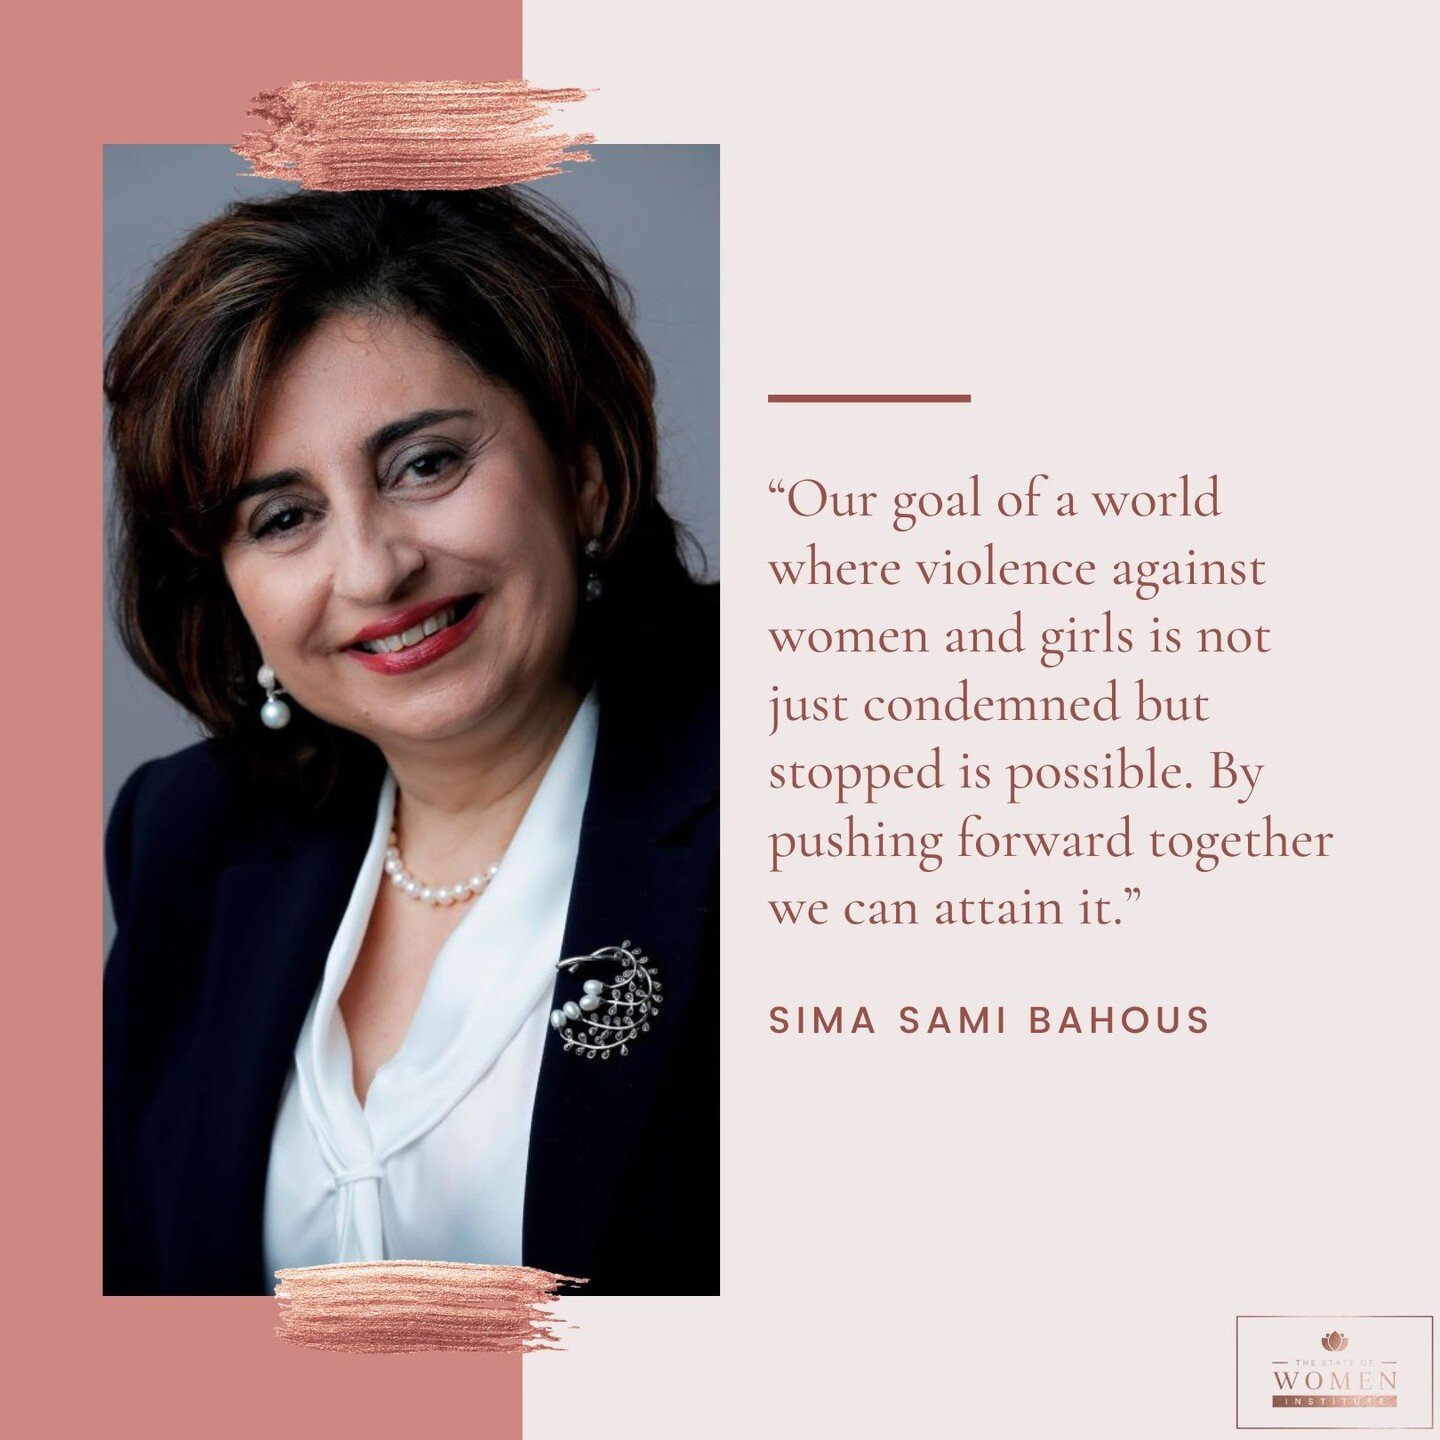 From a statement by UN Women Executive Director Sima Sami Bahous for the International Day for the Elimination of Violence against Women:⁠
⁠
&ldquo;We cannot let our determination to keep &lsquo;pushing forward&rsquo; for gender equality waver. Our g